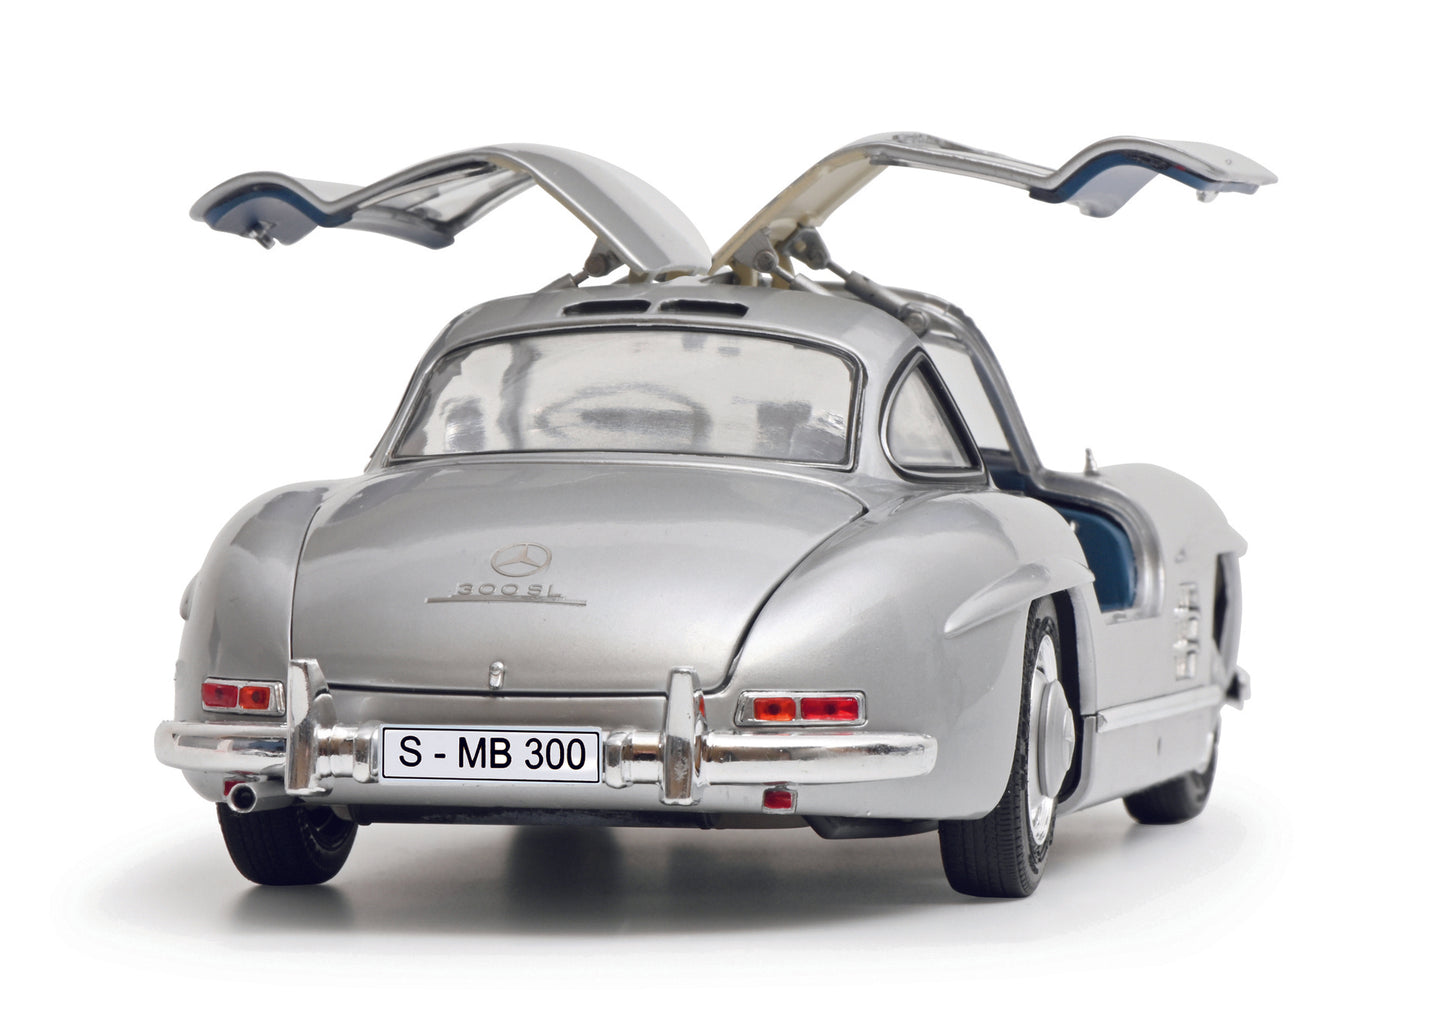 Schuco 450045200 - MB 300 SL Gullwing Silver  1:18 EAN: 4007864057580, at Ajckids.com, authorized Schuco dealer for the USA.